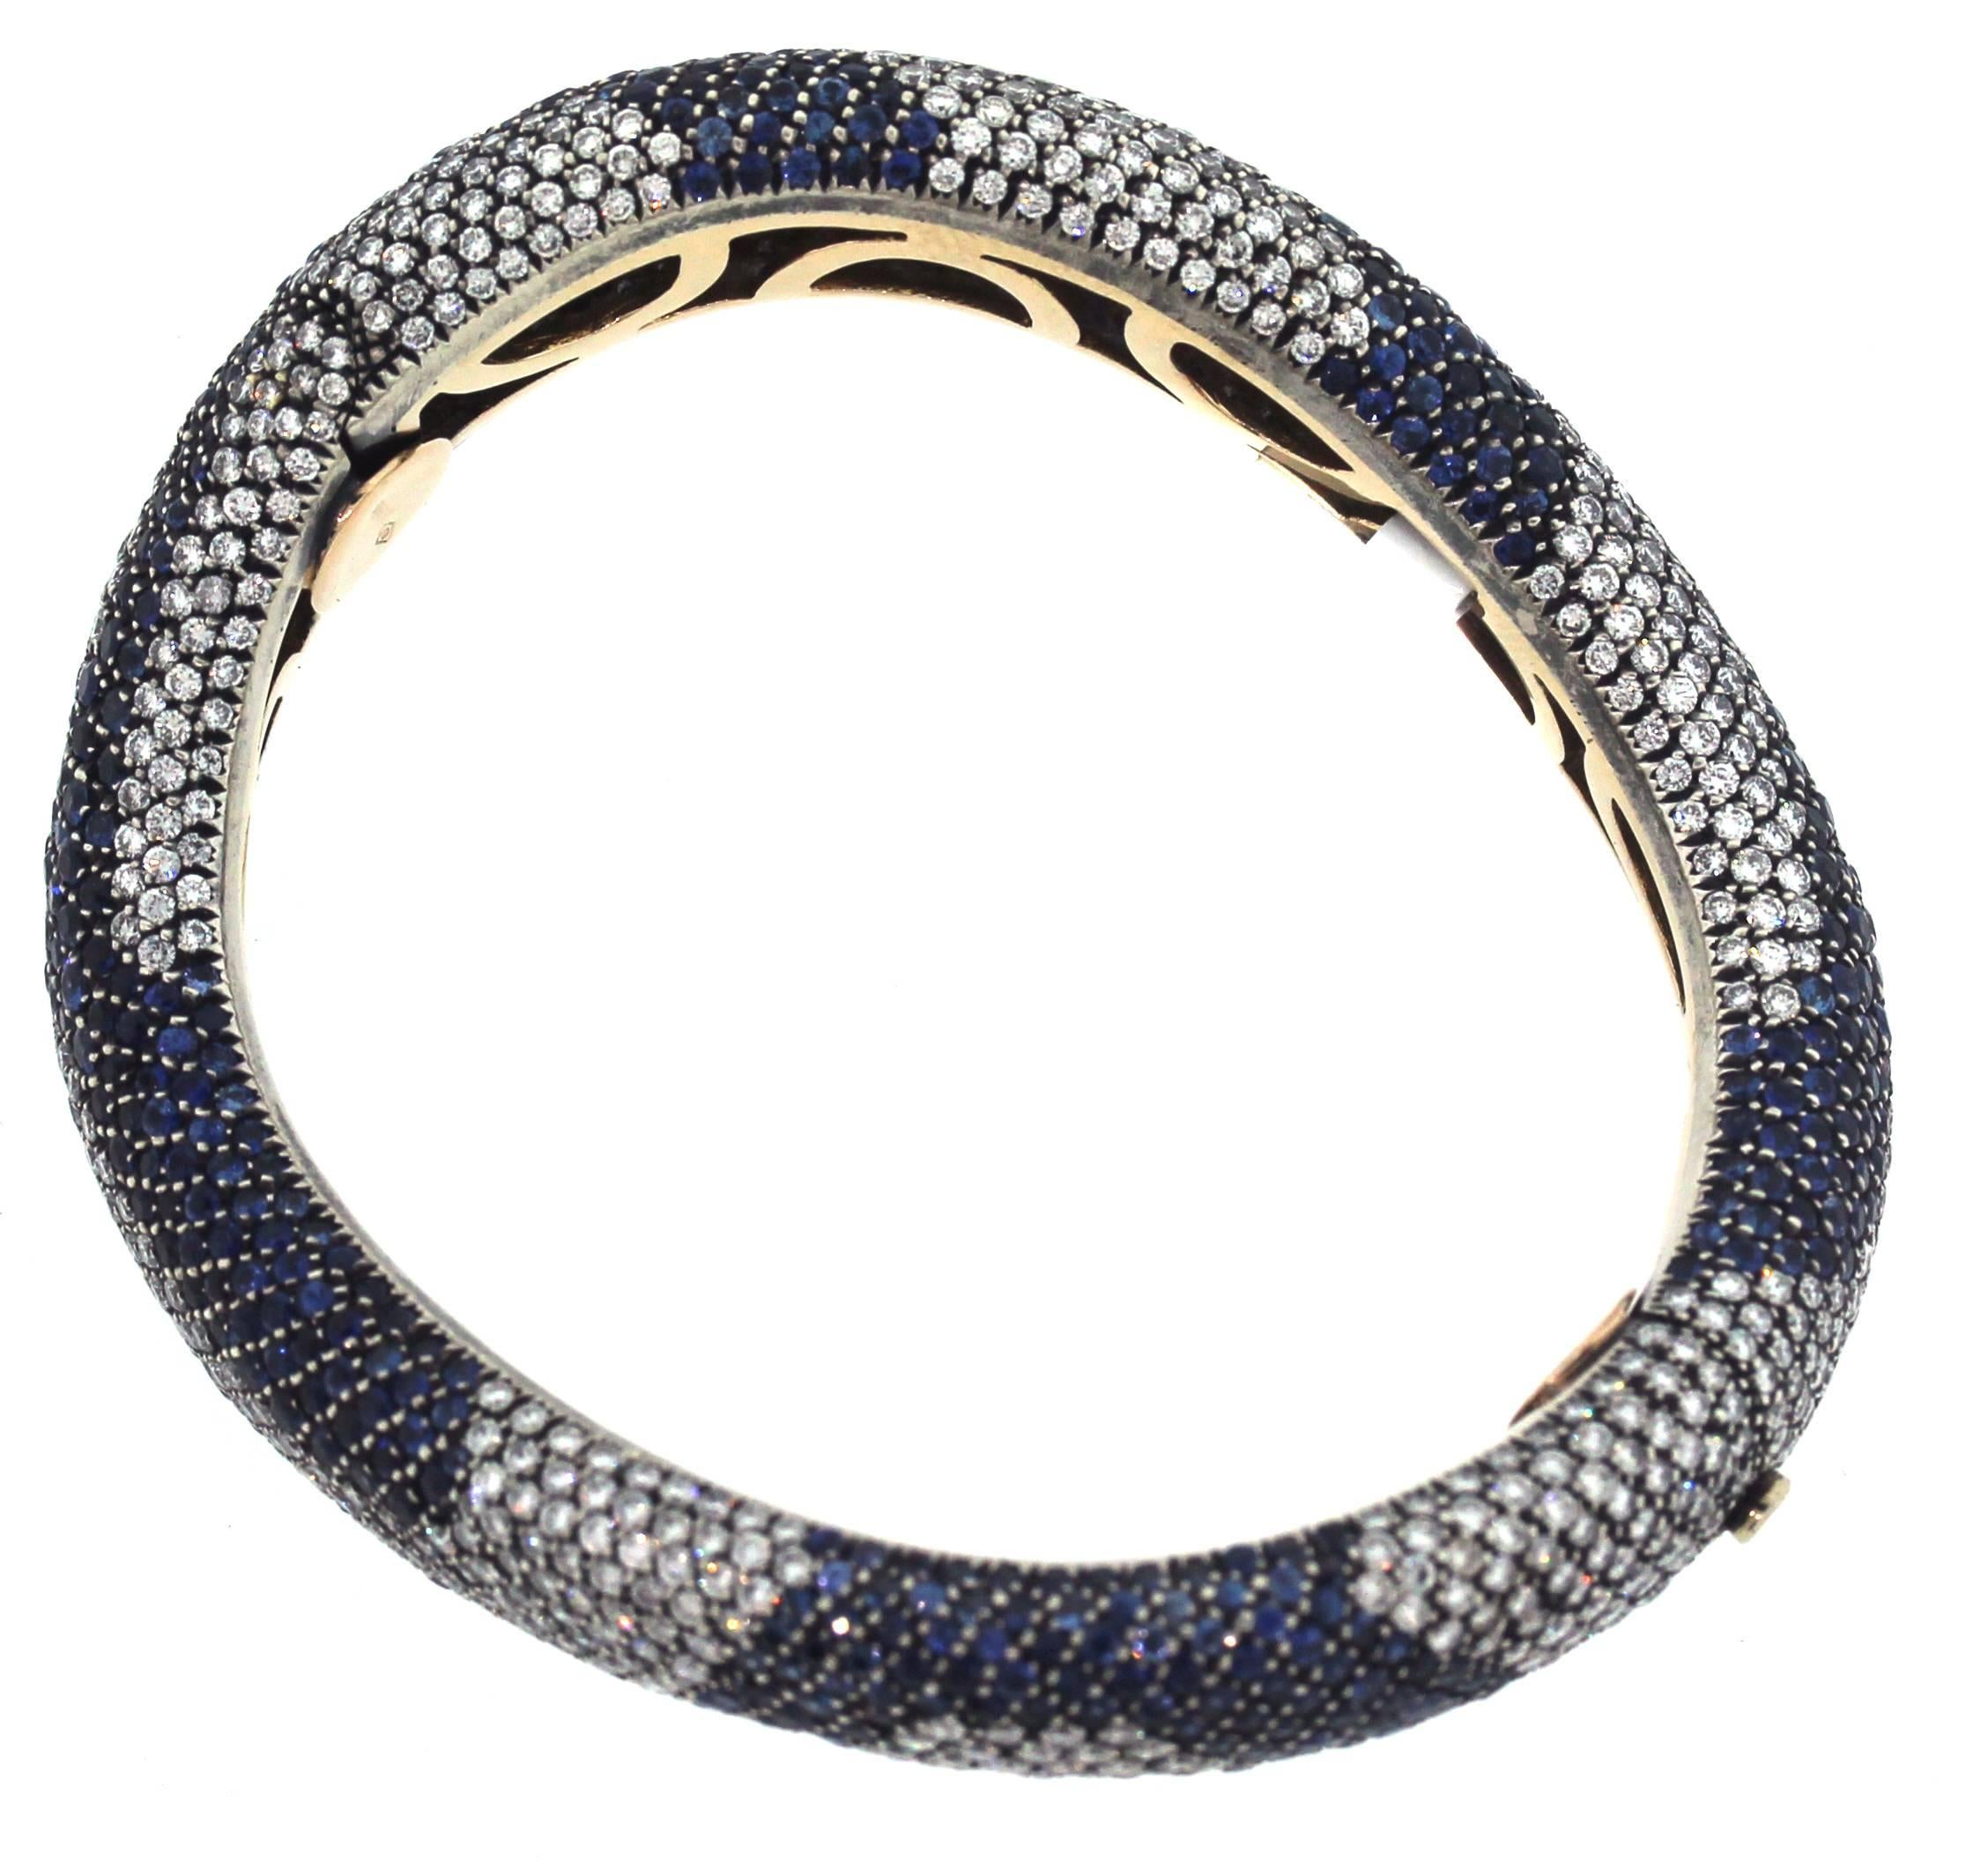 Cantamessa 18K Gold Shaded Blue Sapphire and Diamonds Curved Bangle Bracelet

9 carats apprx. Blue Sapphires 

8.50 carat G color, VS clarity diamonds 

Bracelet is a size 7.
0.5 inch width.

Cantamessa is an American Designer from New York
